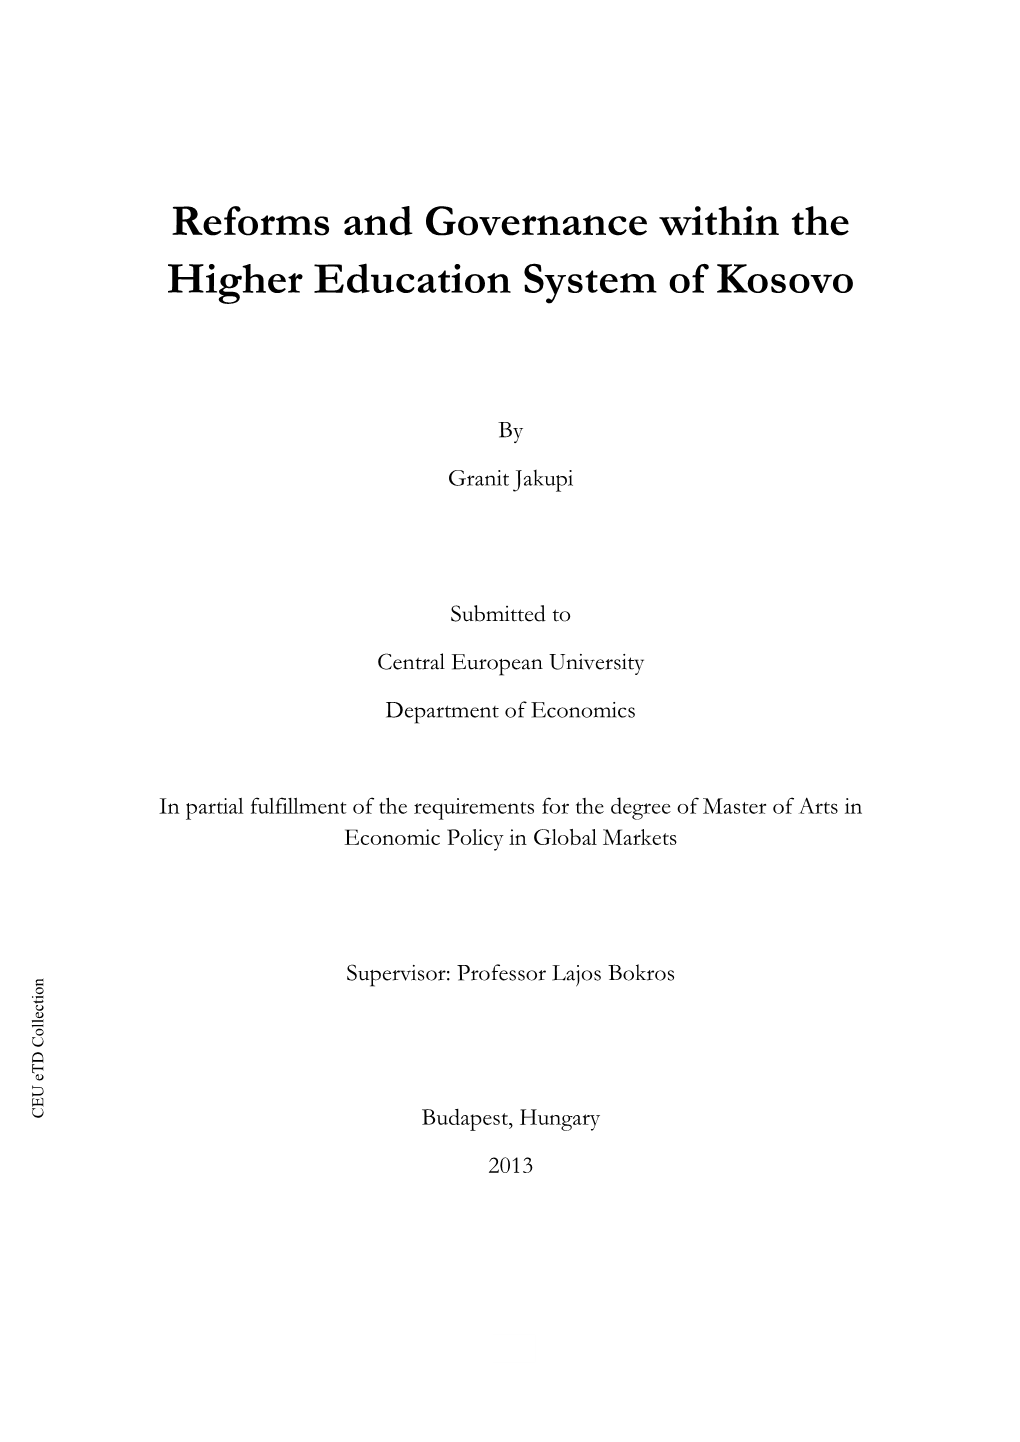 Reforms and Governance Within the Higher Education System of Kosovo